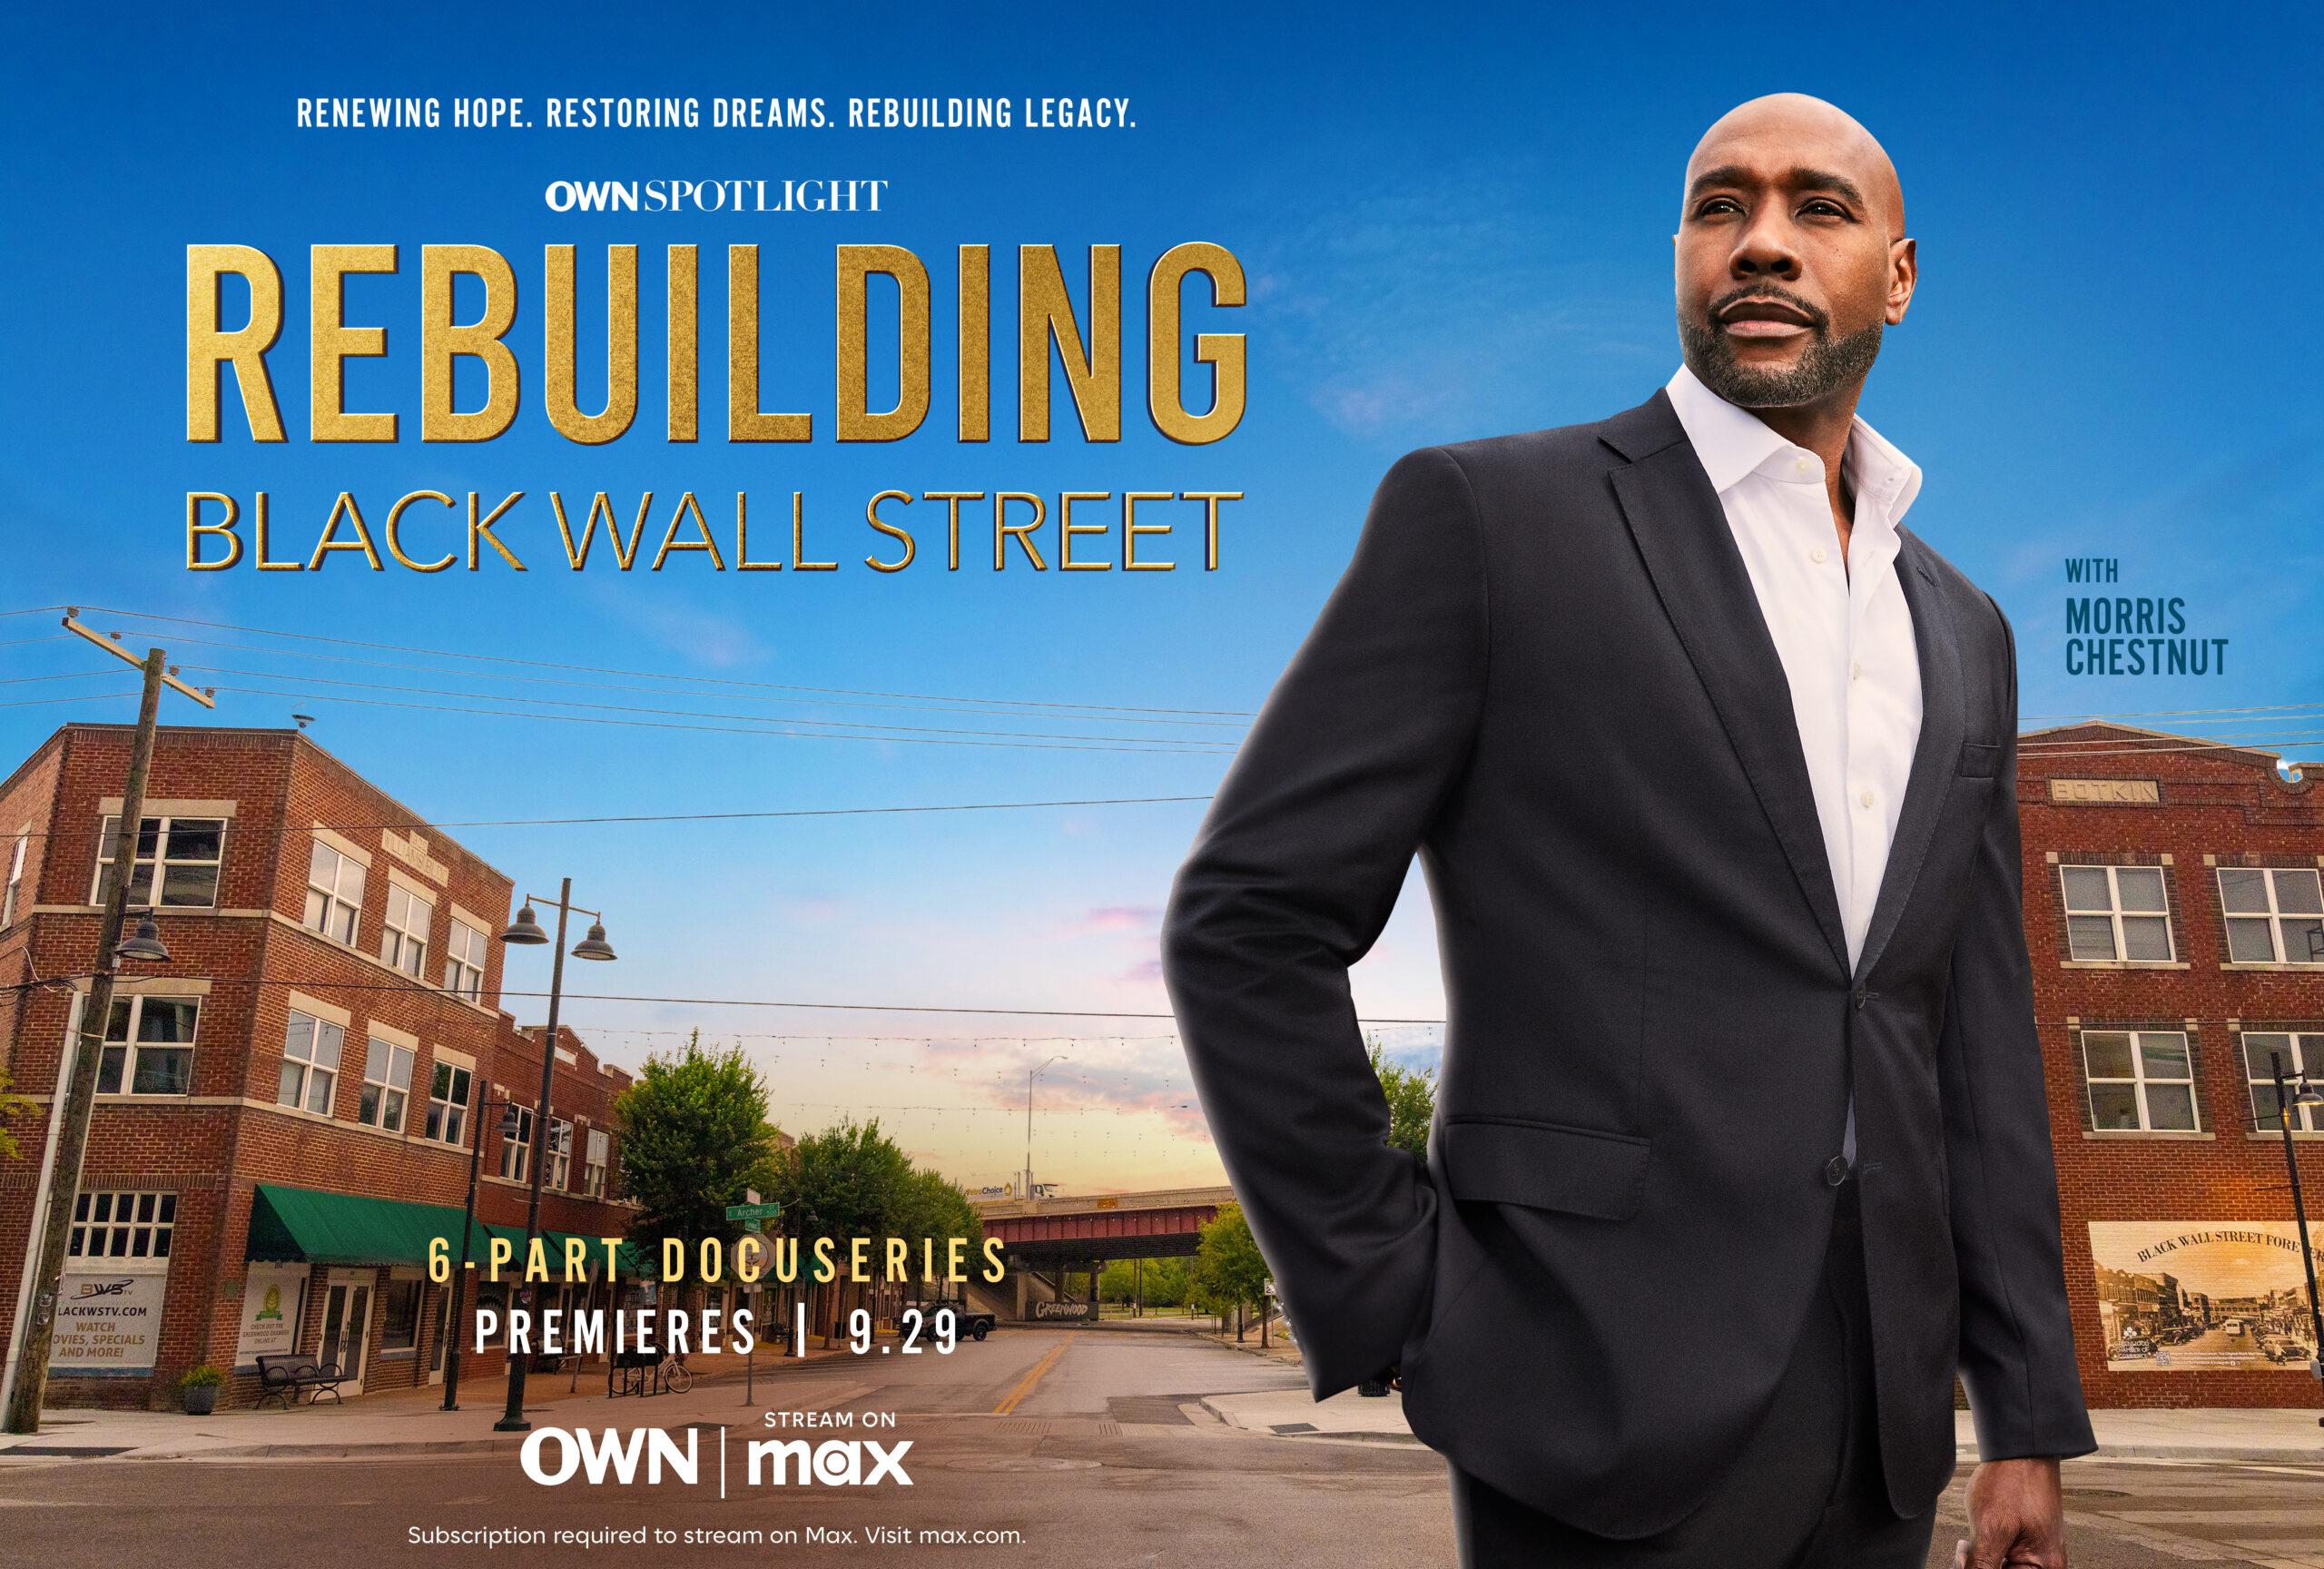 OWN’s Six-Part Docuseries “Rebuilding Black Wall Street” Premieres, Showcasing Tulsa’s Resilience hosted by Morris Chestnut